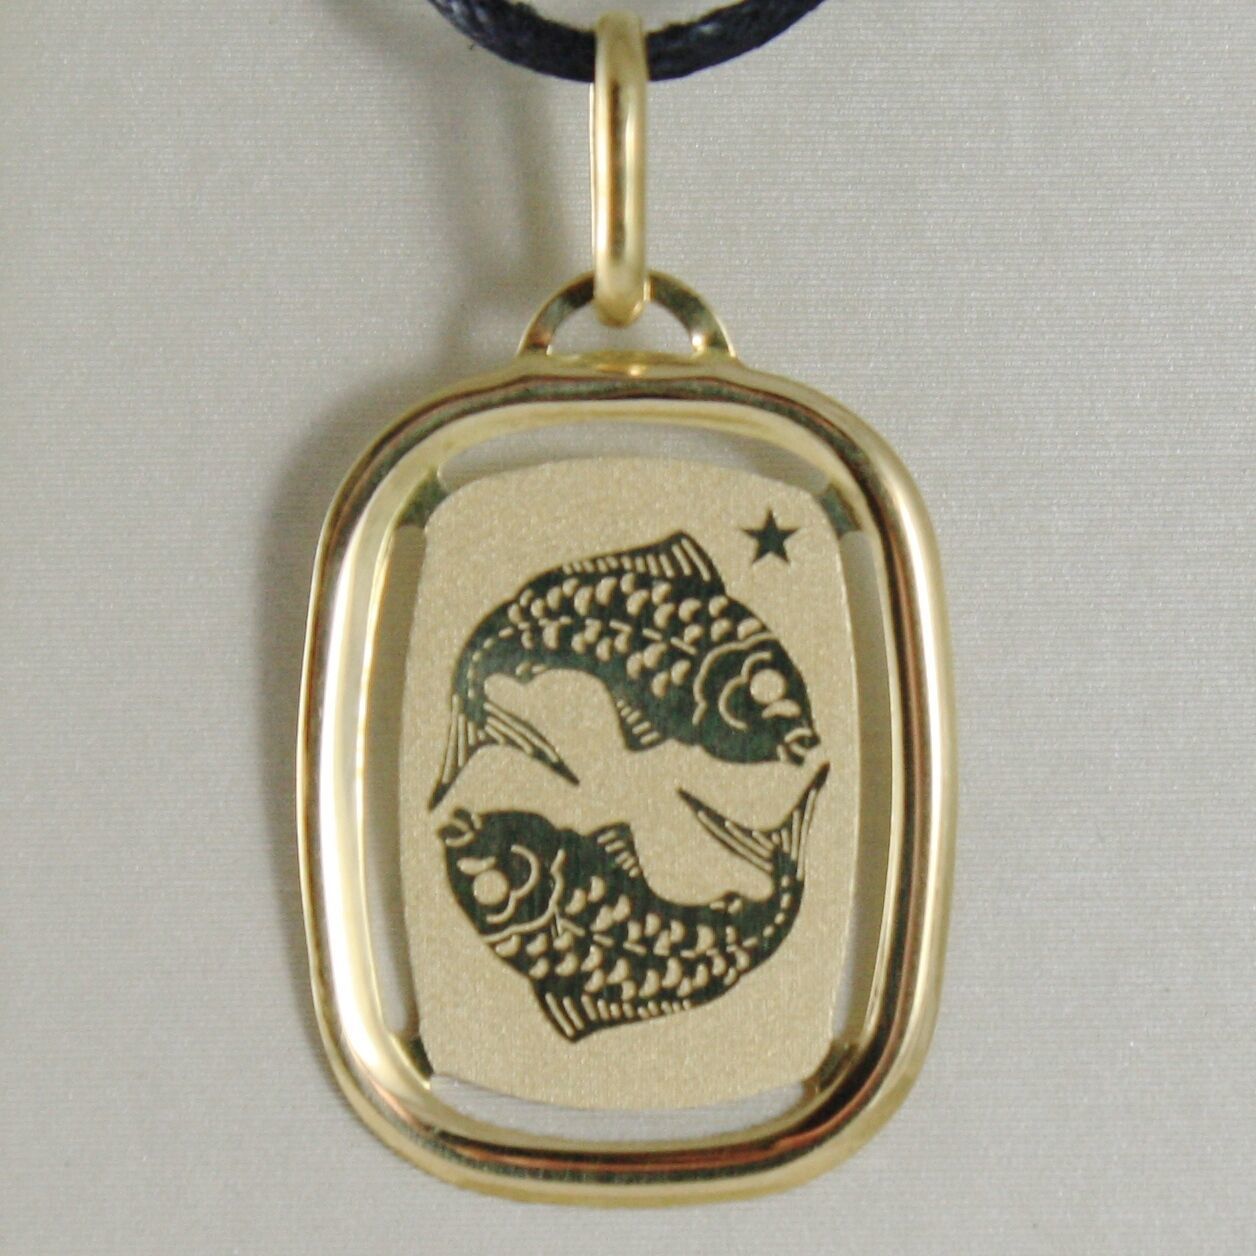 Primary image for SOLID 18K YELLOW GOLD PISCES ZODIAC SIGN MEDAL PENDANT ZODIACAL MADE IN ITALY